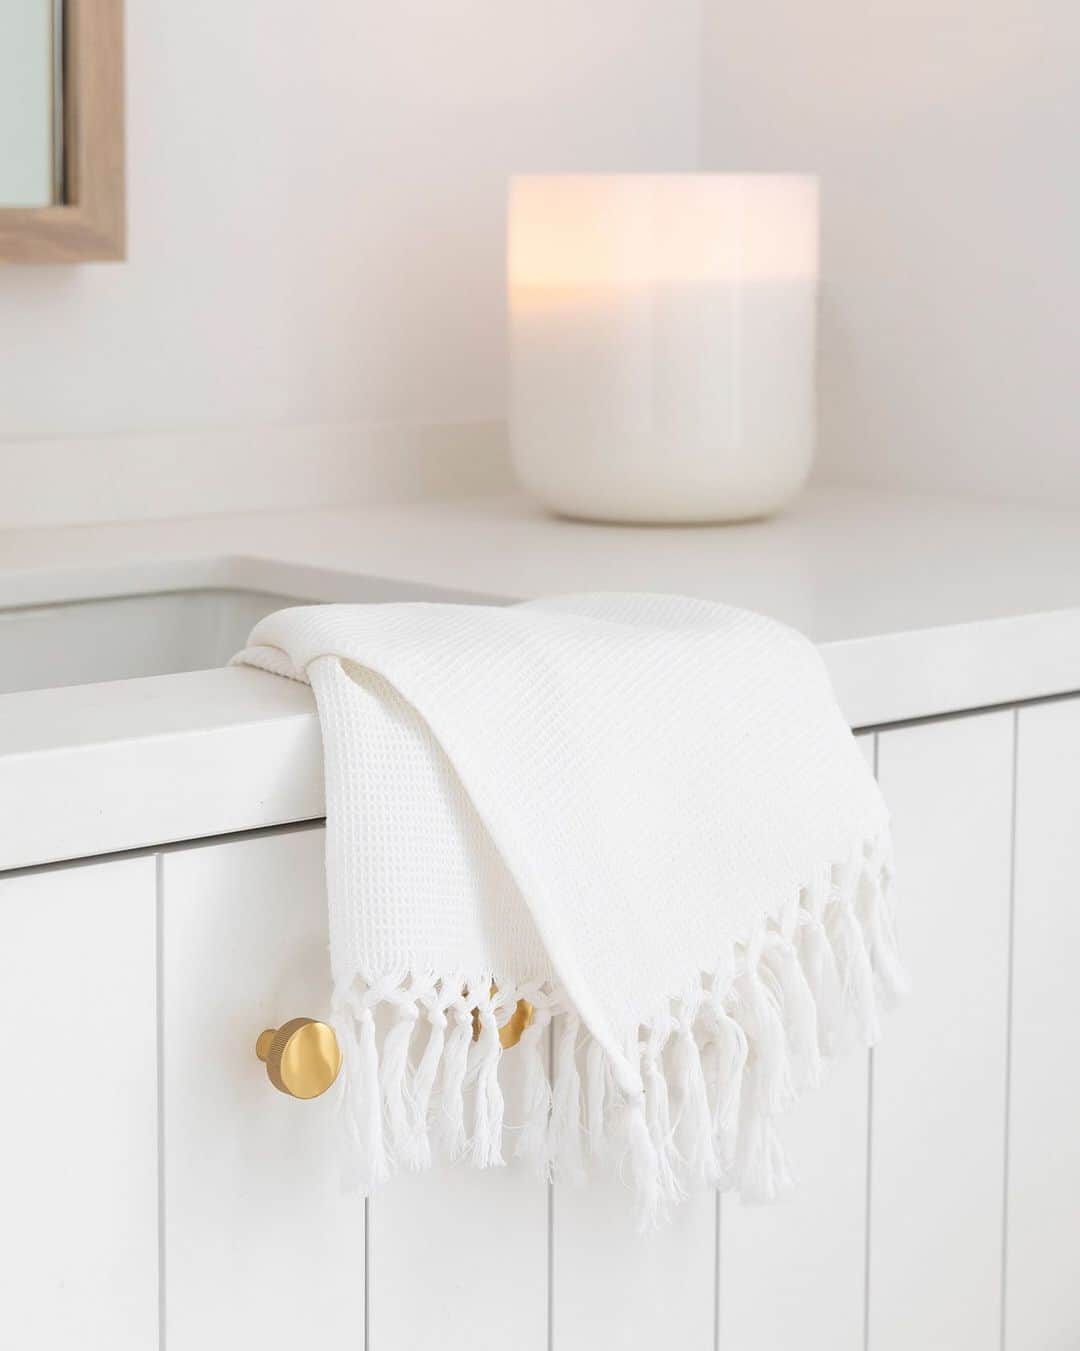 The Little Marketのインスタグラム：「Lightweight, quick-drying, and made to last. Tap to shop the towel that goes with every room, from the kitchen to the bathroom countertop.」